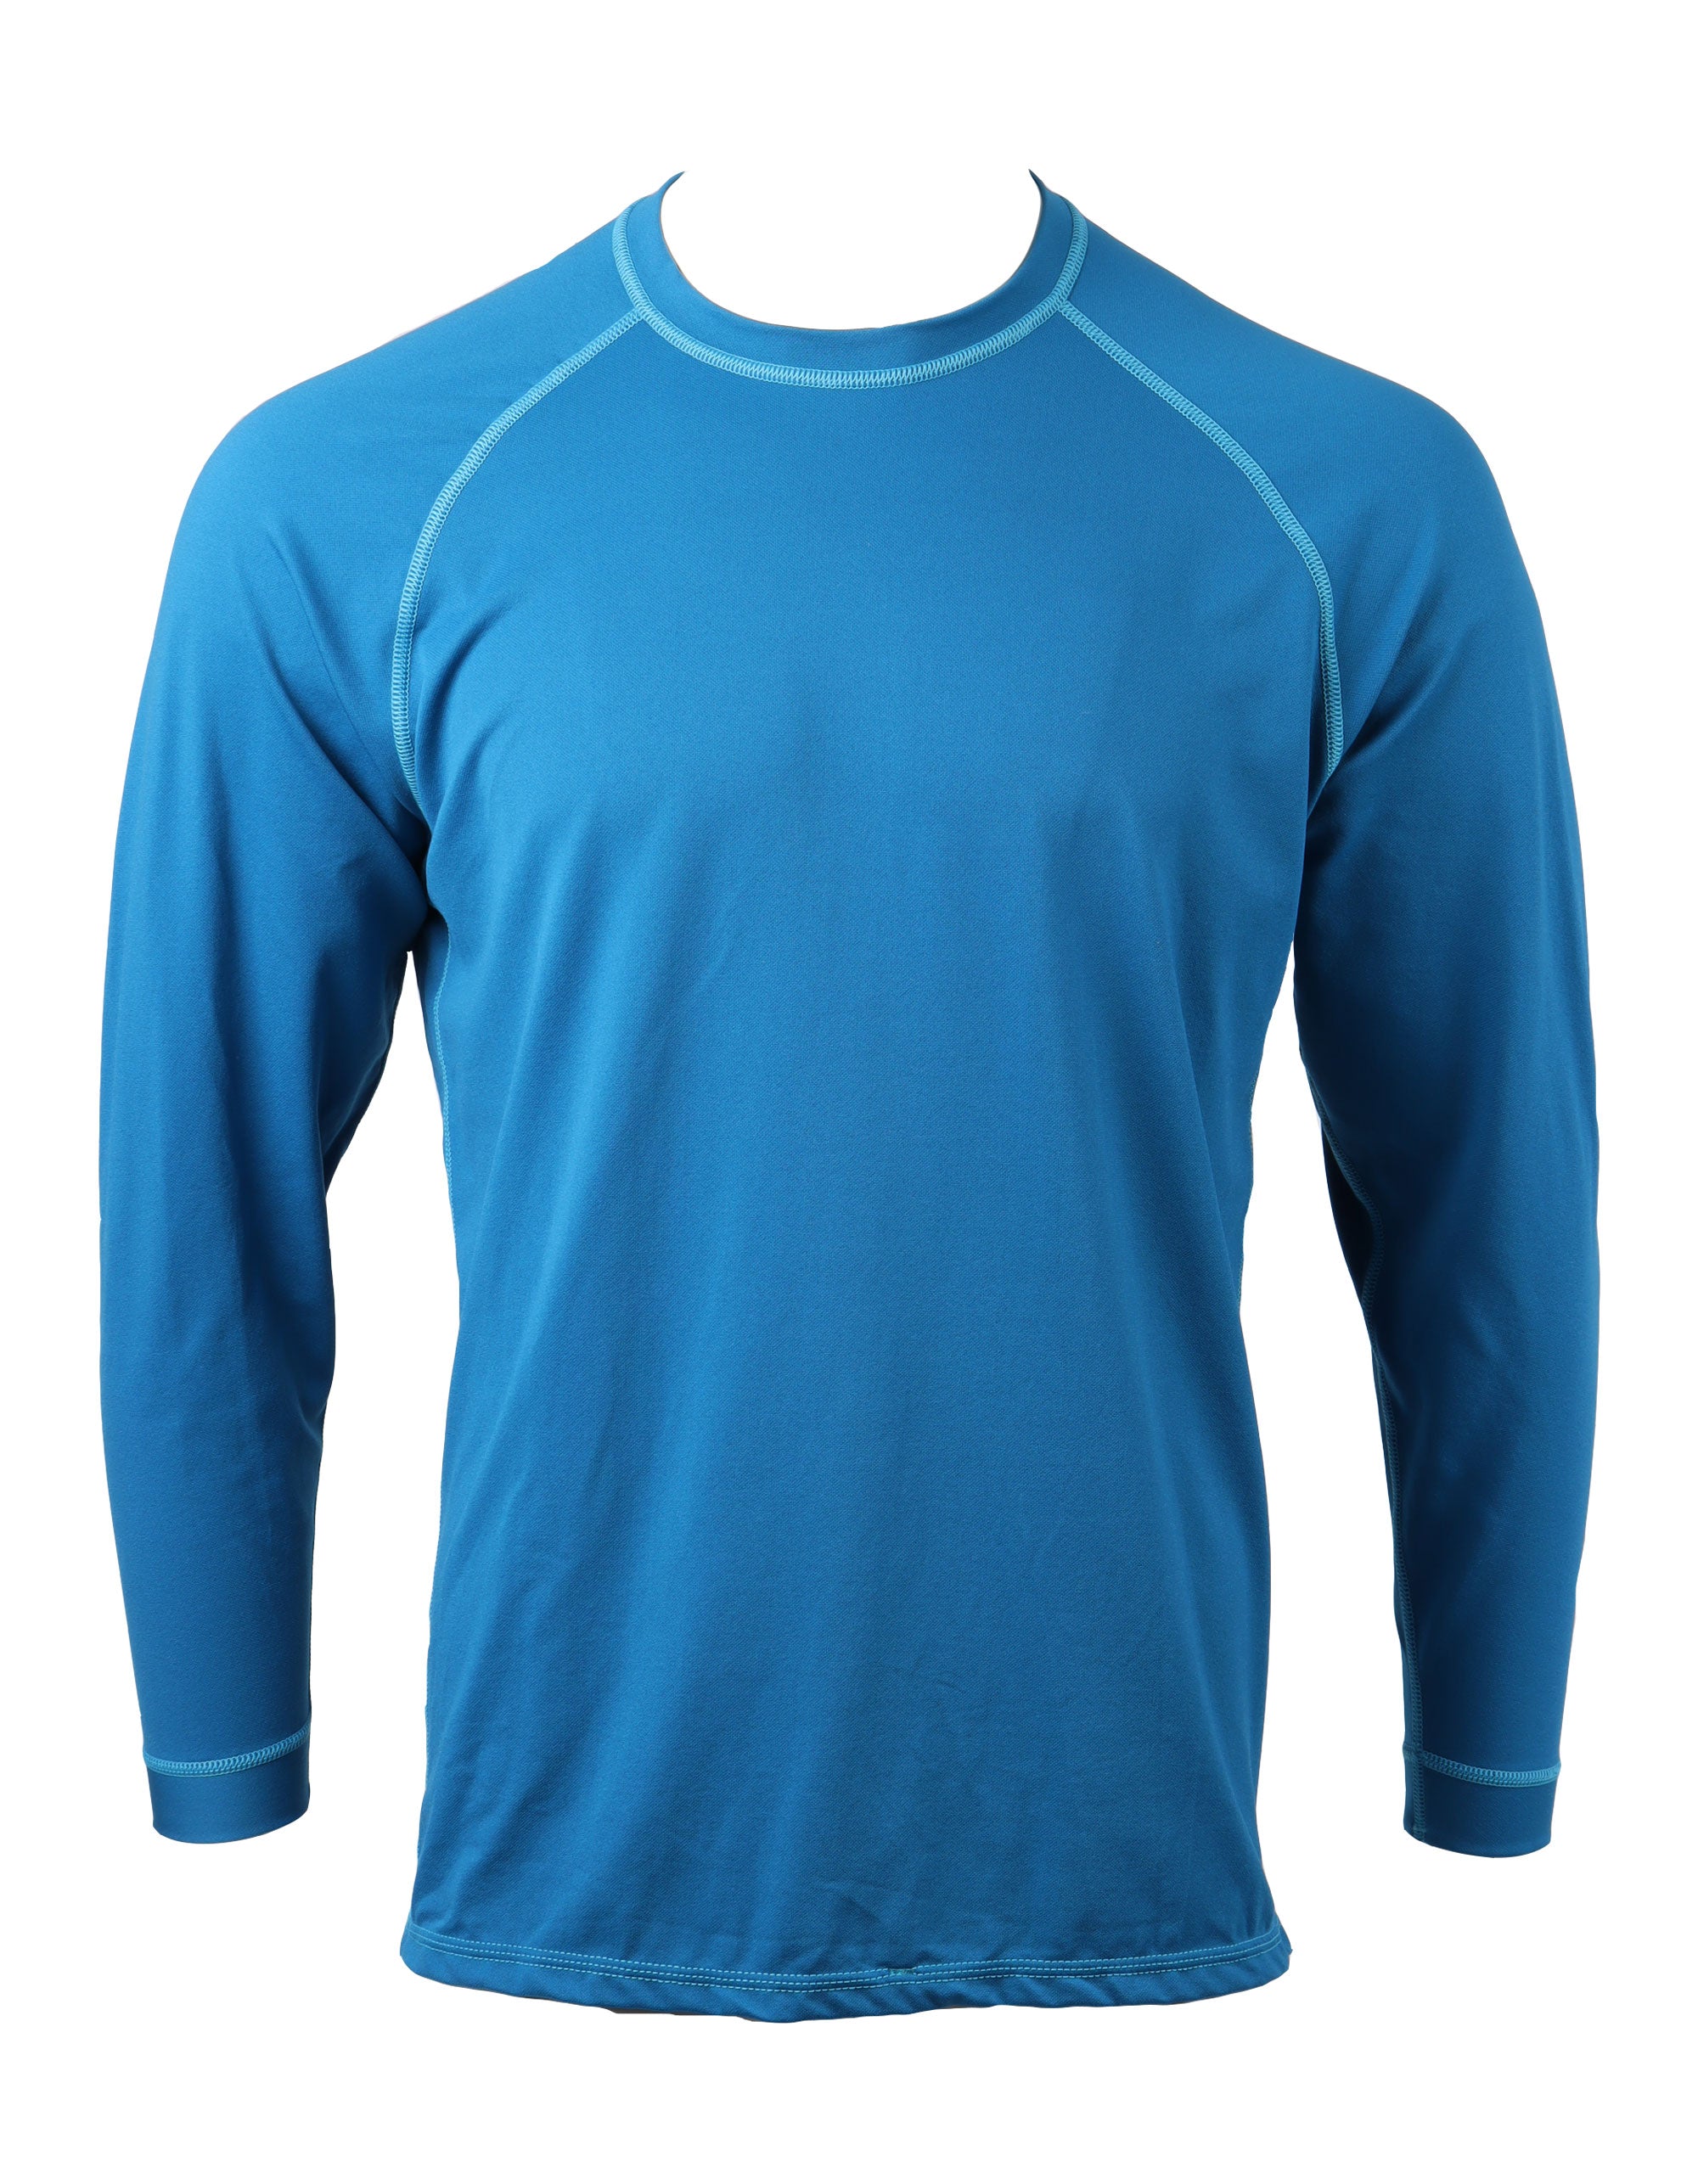 Koredry Loose Fit Long Sleeve Shirt For Water Sports – Water-Resistant, UPF 50+